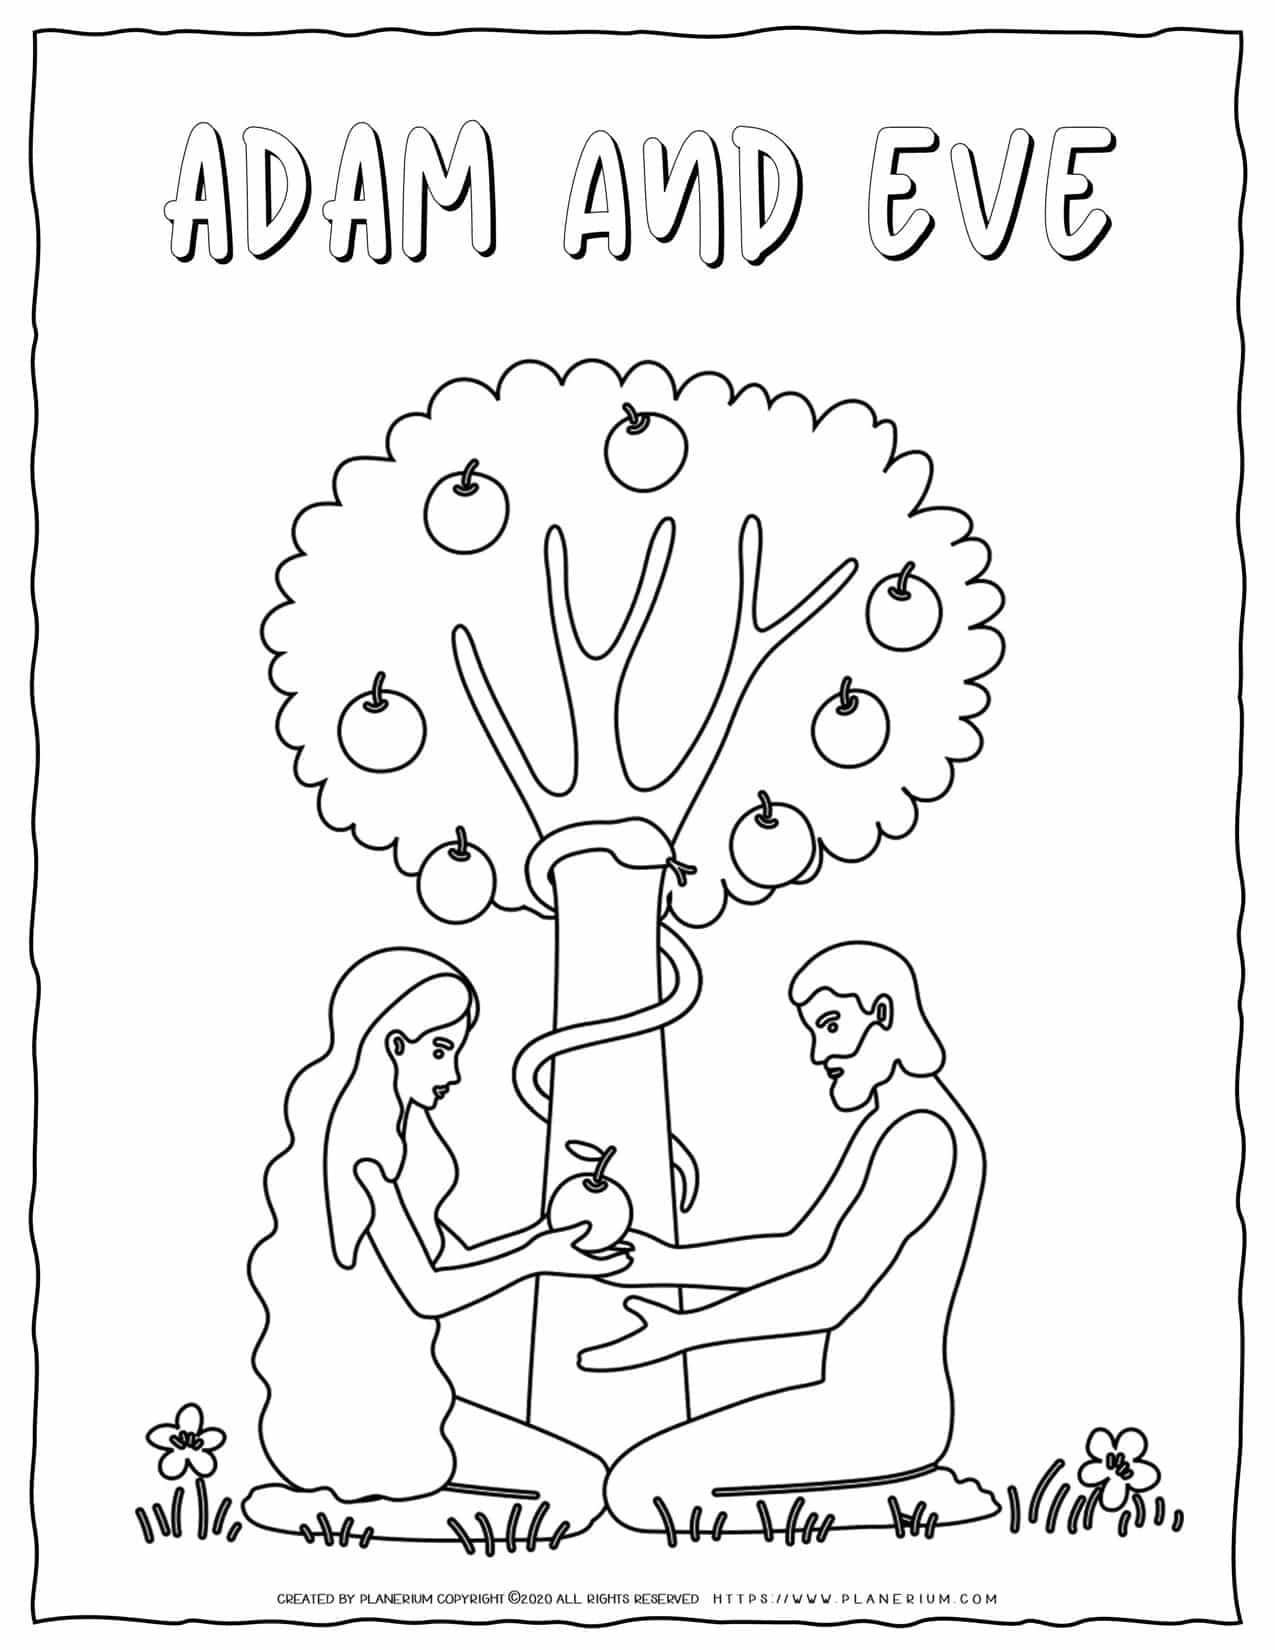 adam-and-eve-color-sheet